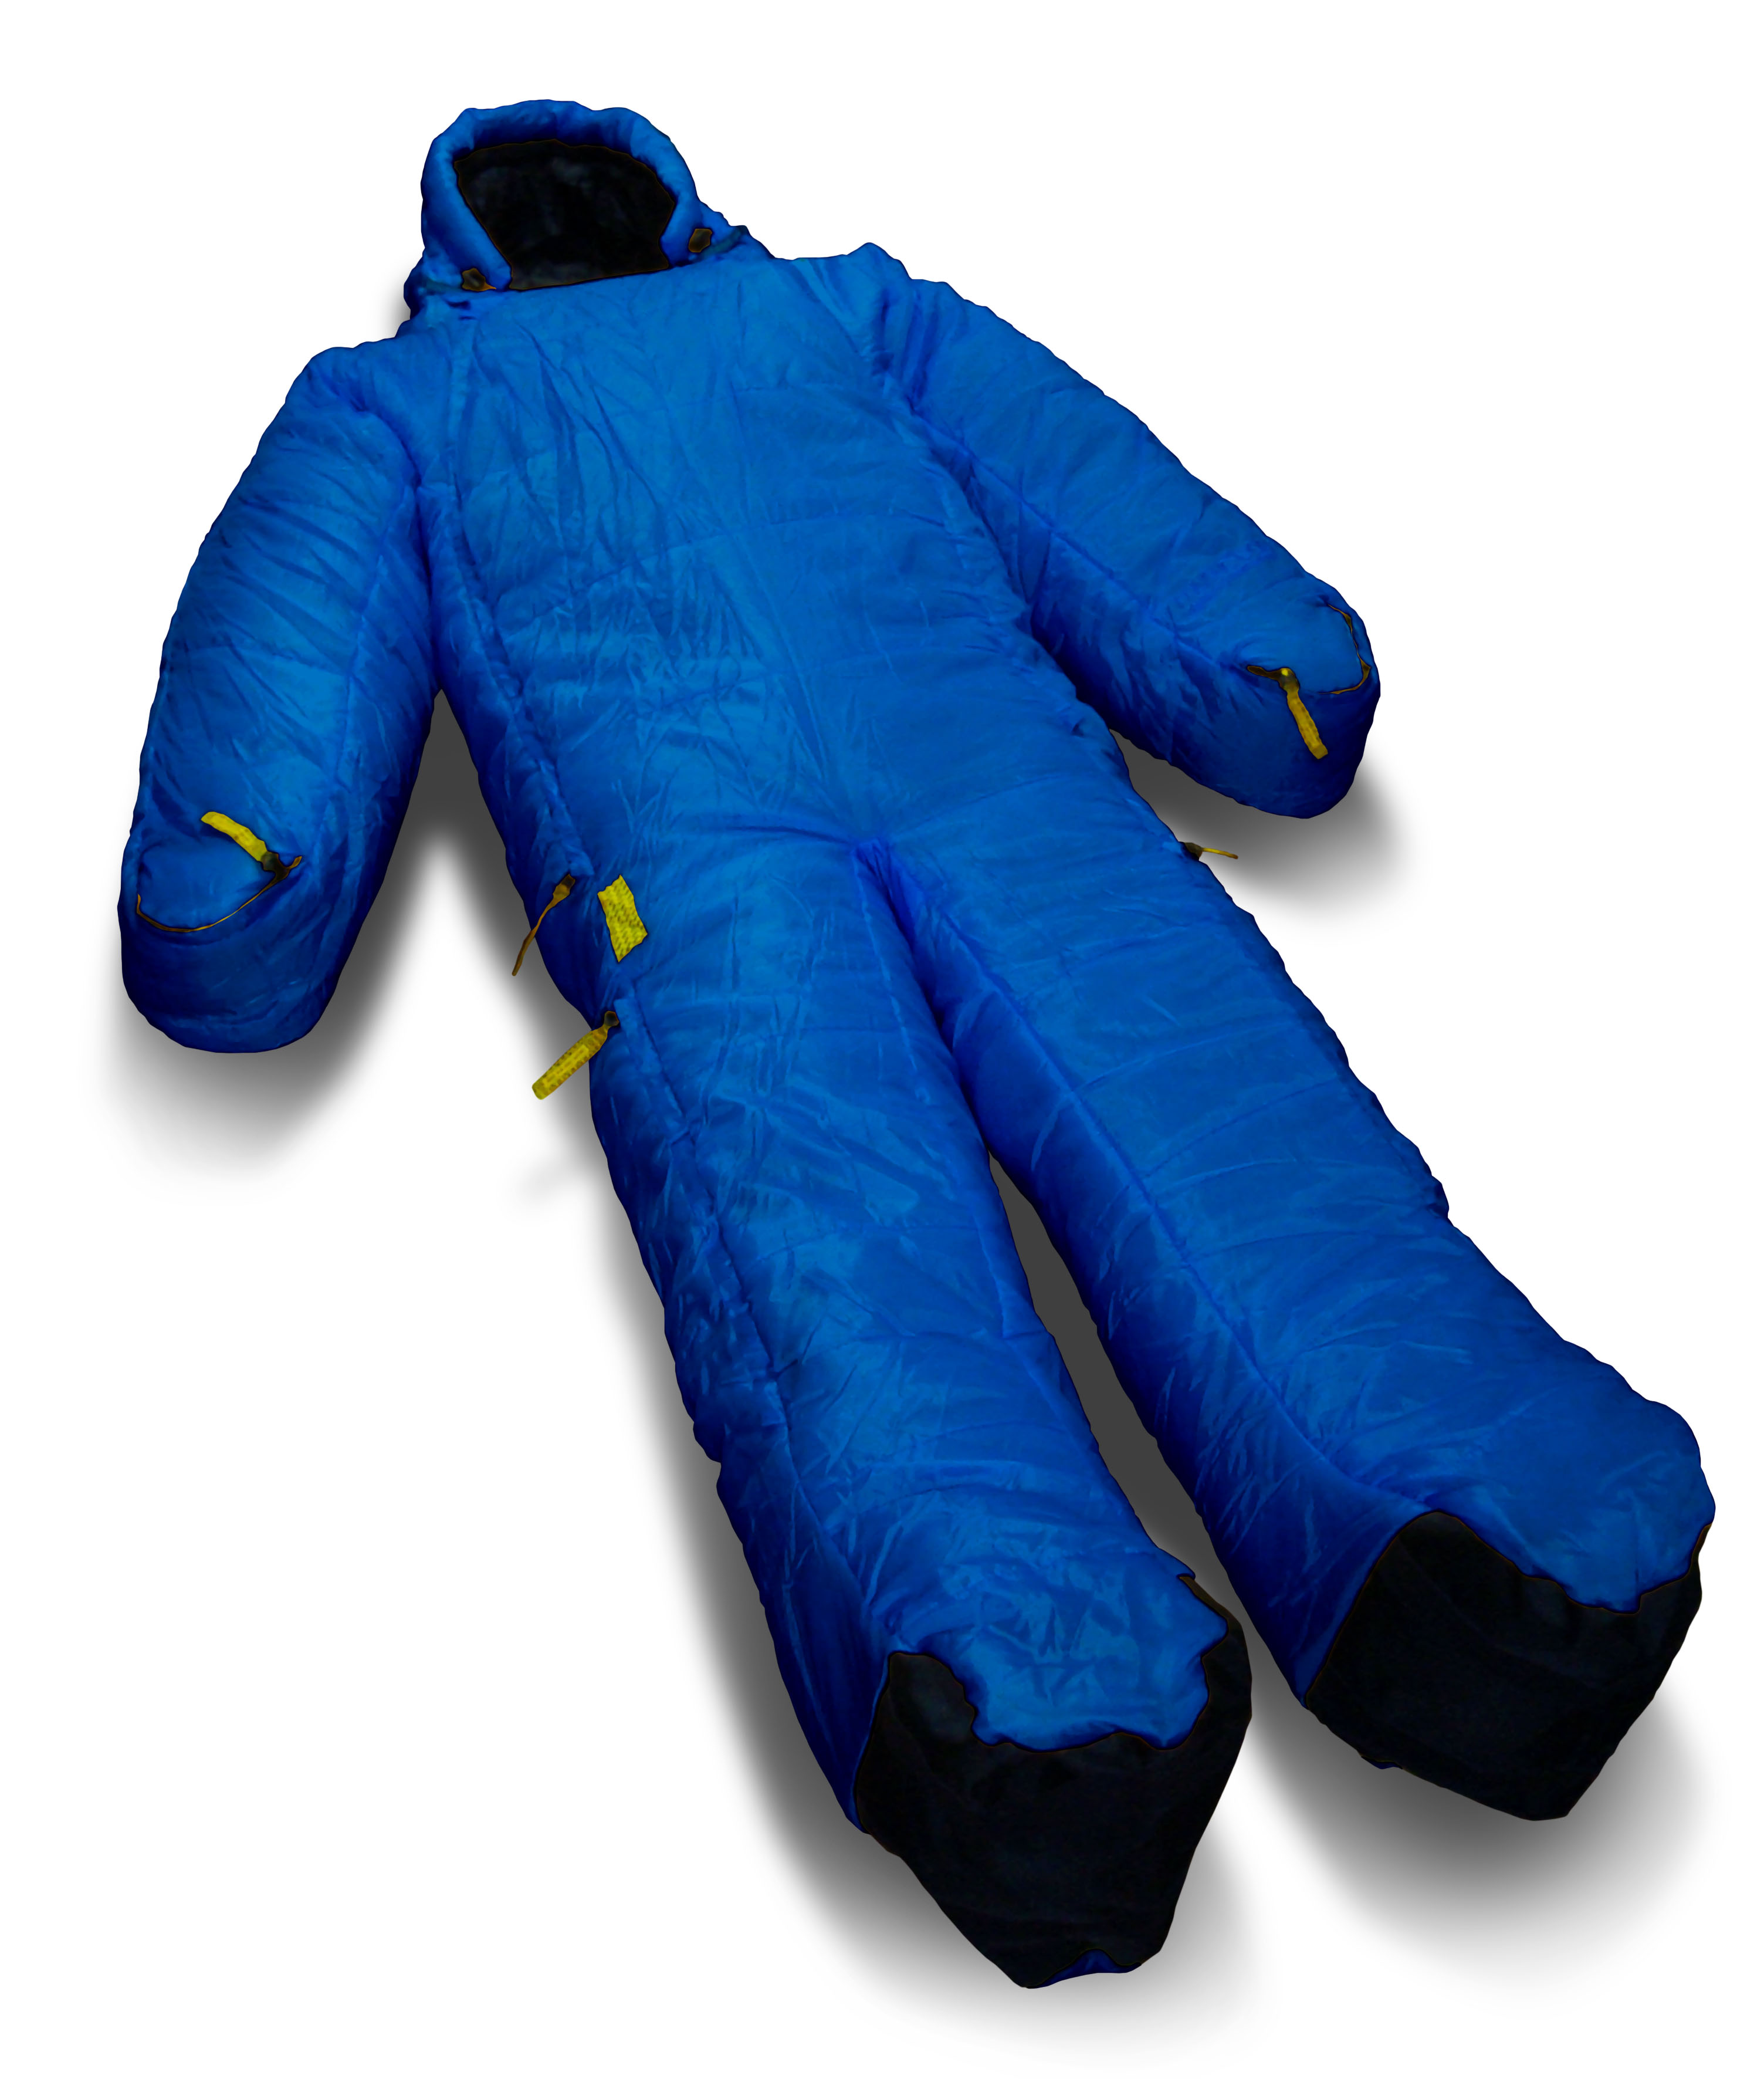 baby's arms cold in sleeping bag